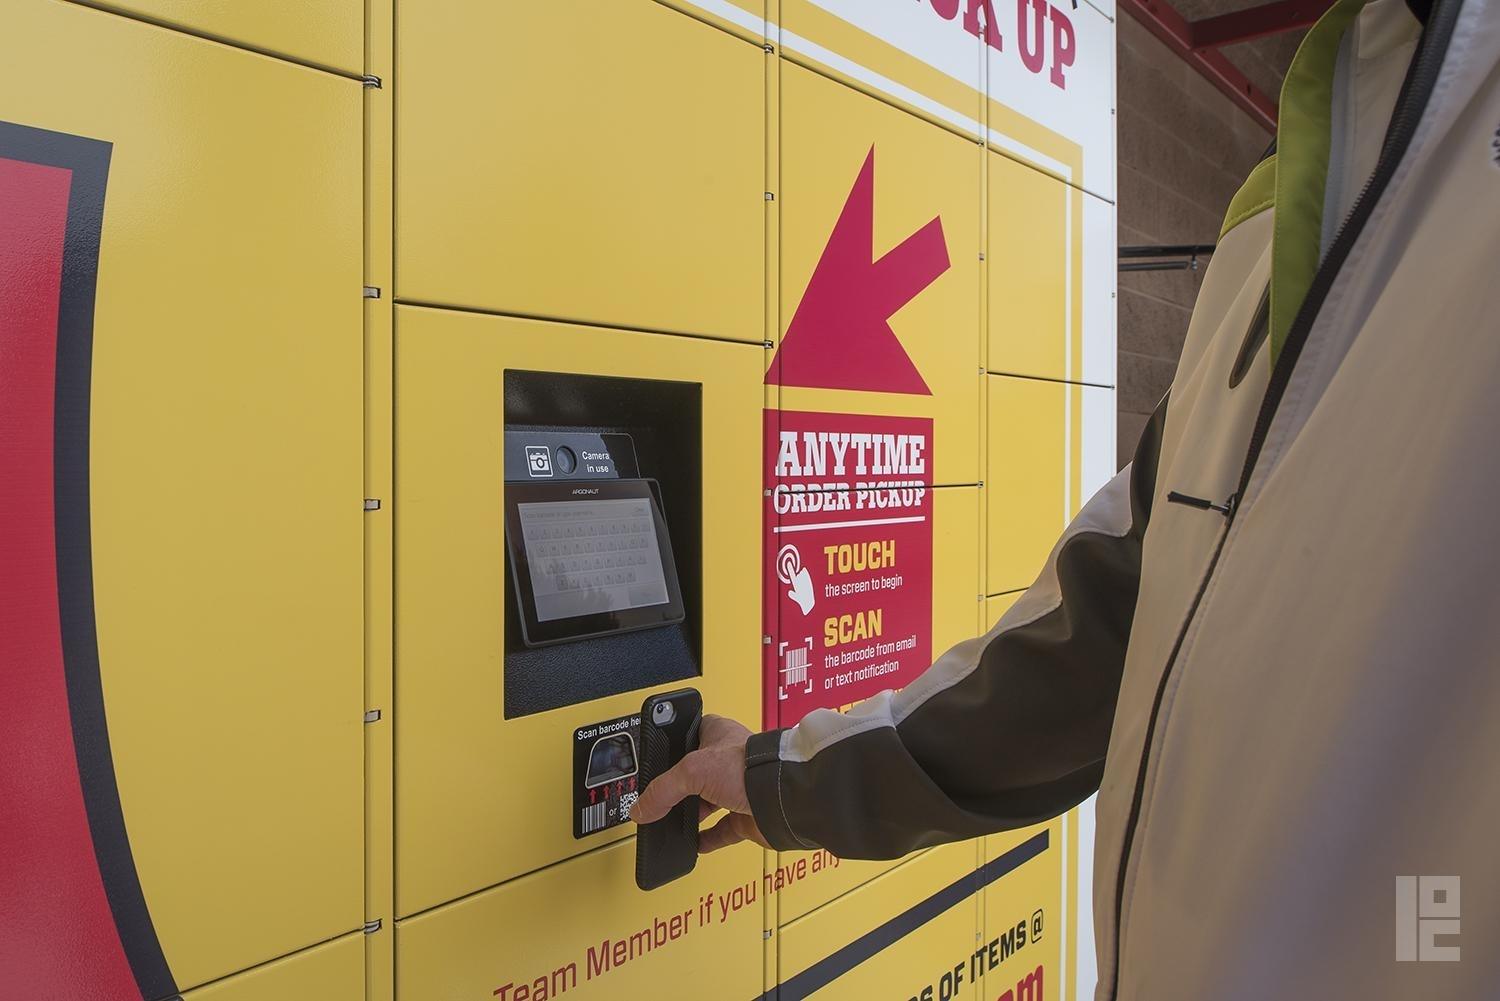 A yellow and red Package Concierge® automated locker system is displayed. A man in a jacket is seen holding up his phone to the barcode scanner to retrieve his package from the locker system